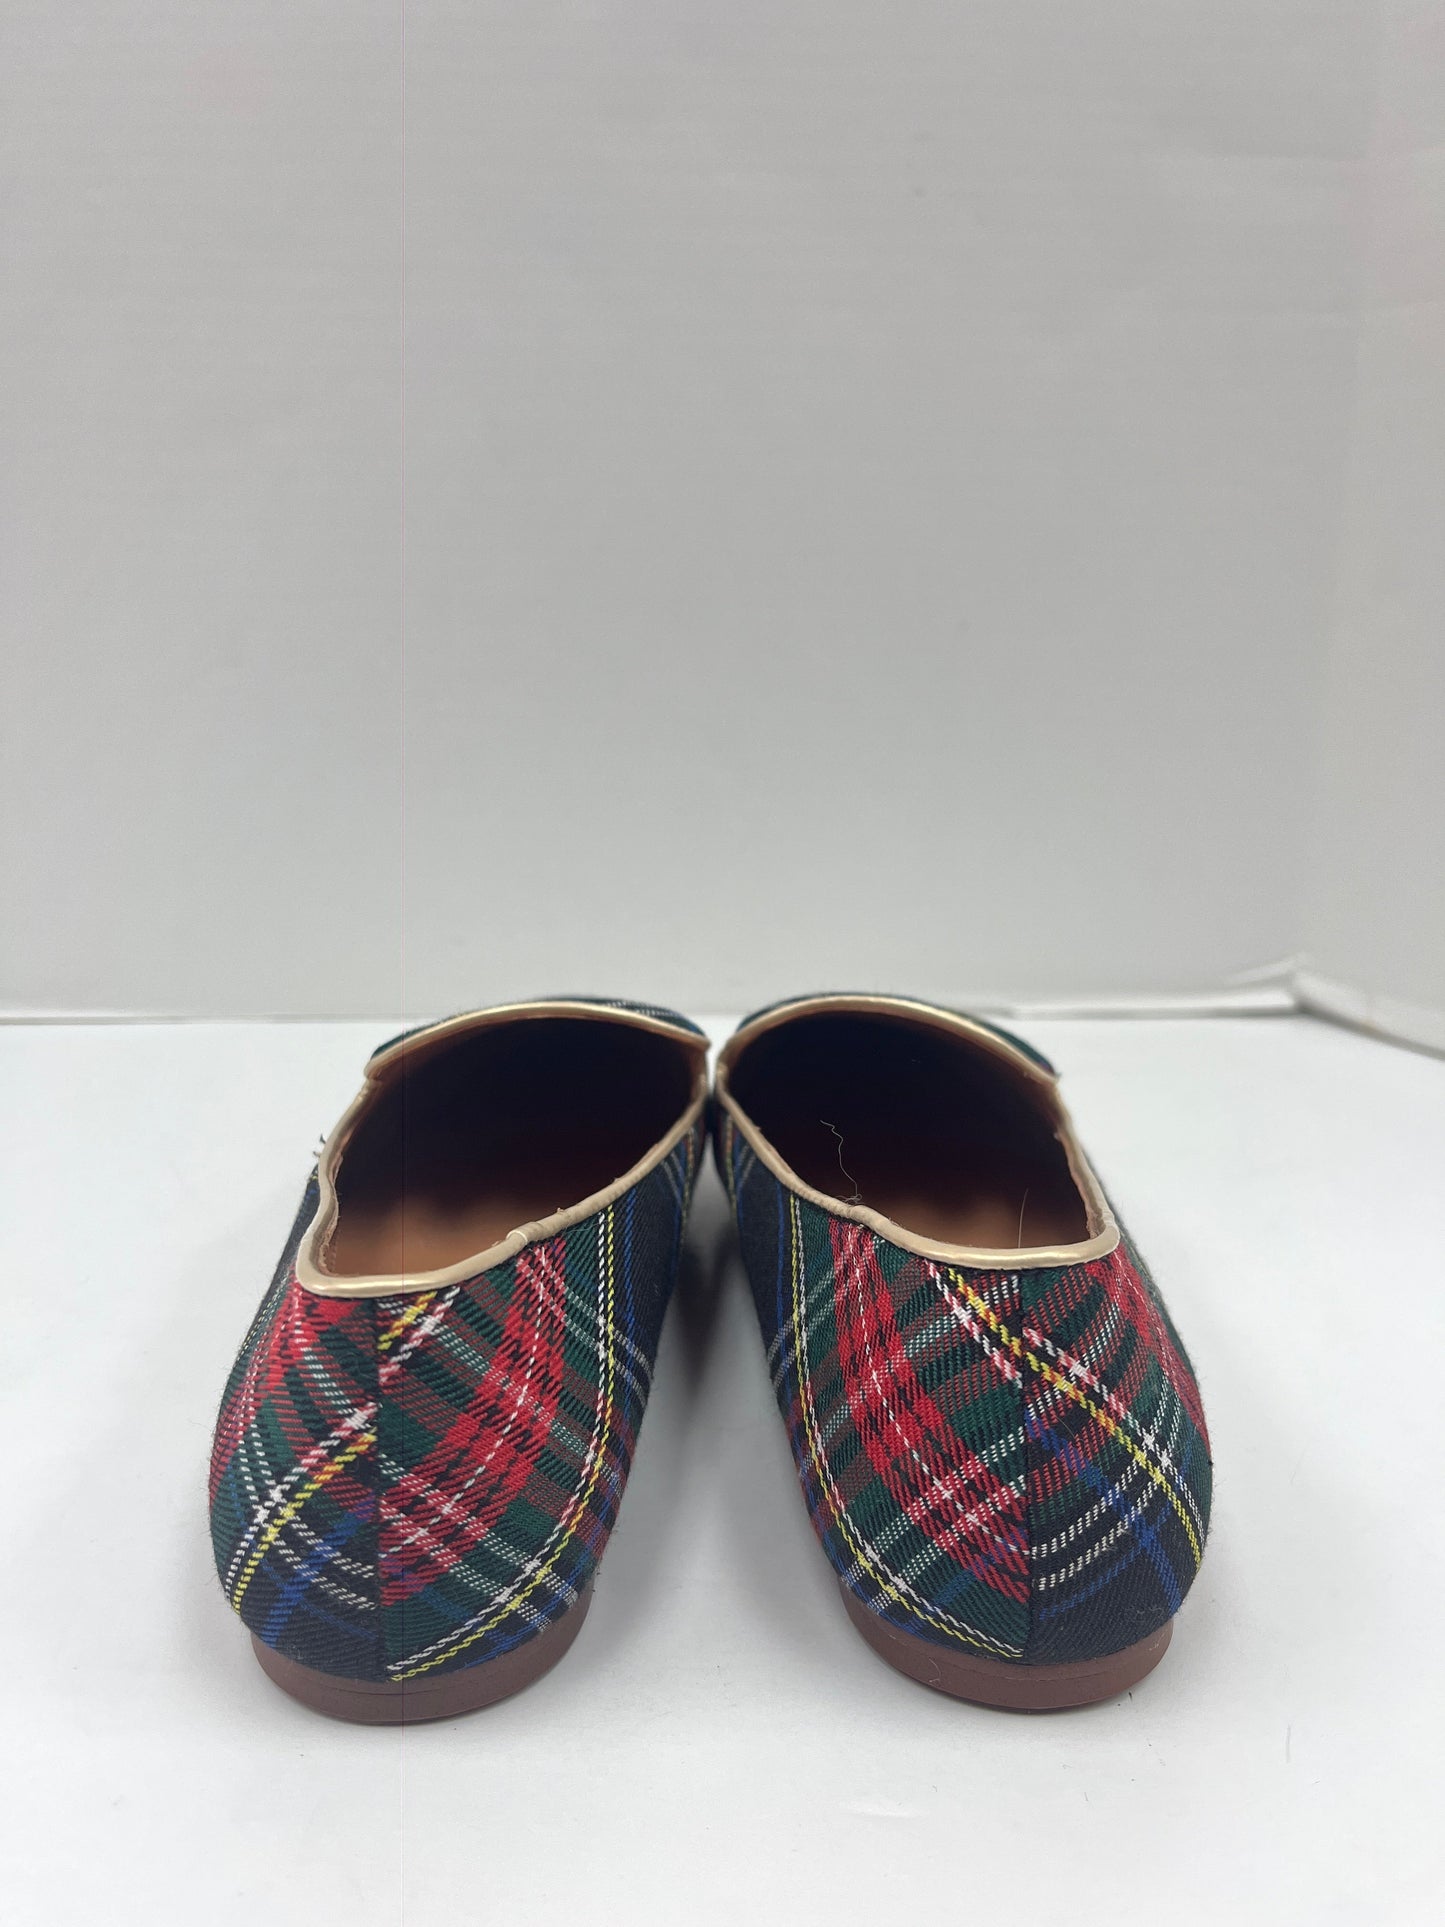 Shoes Flats Ballet By J Crew  Size: 8